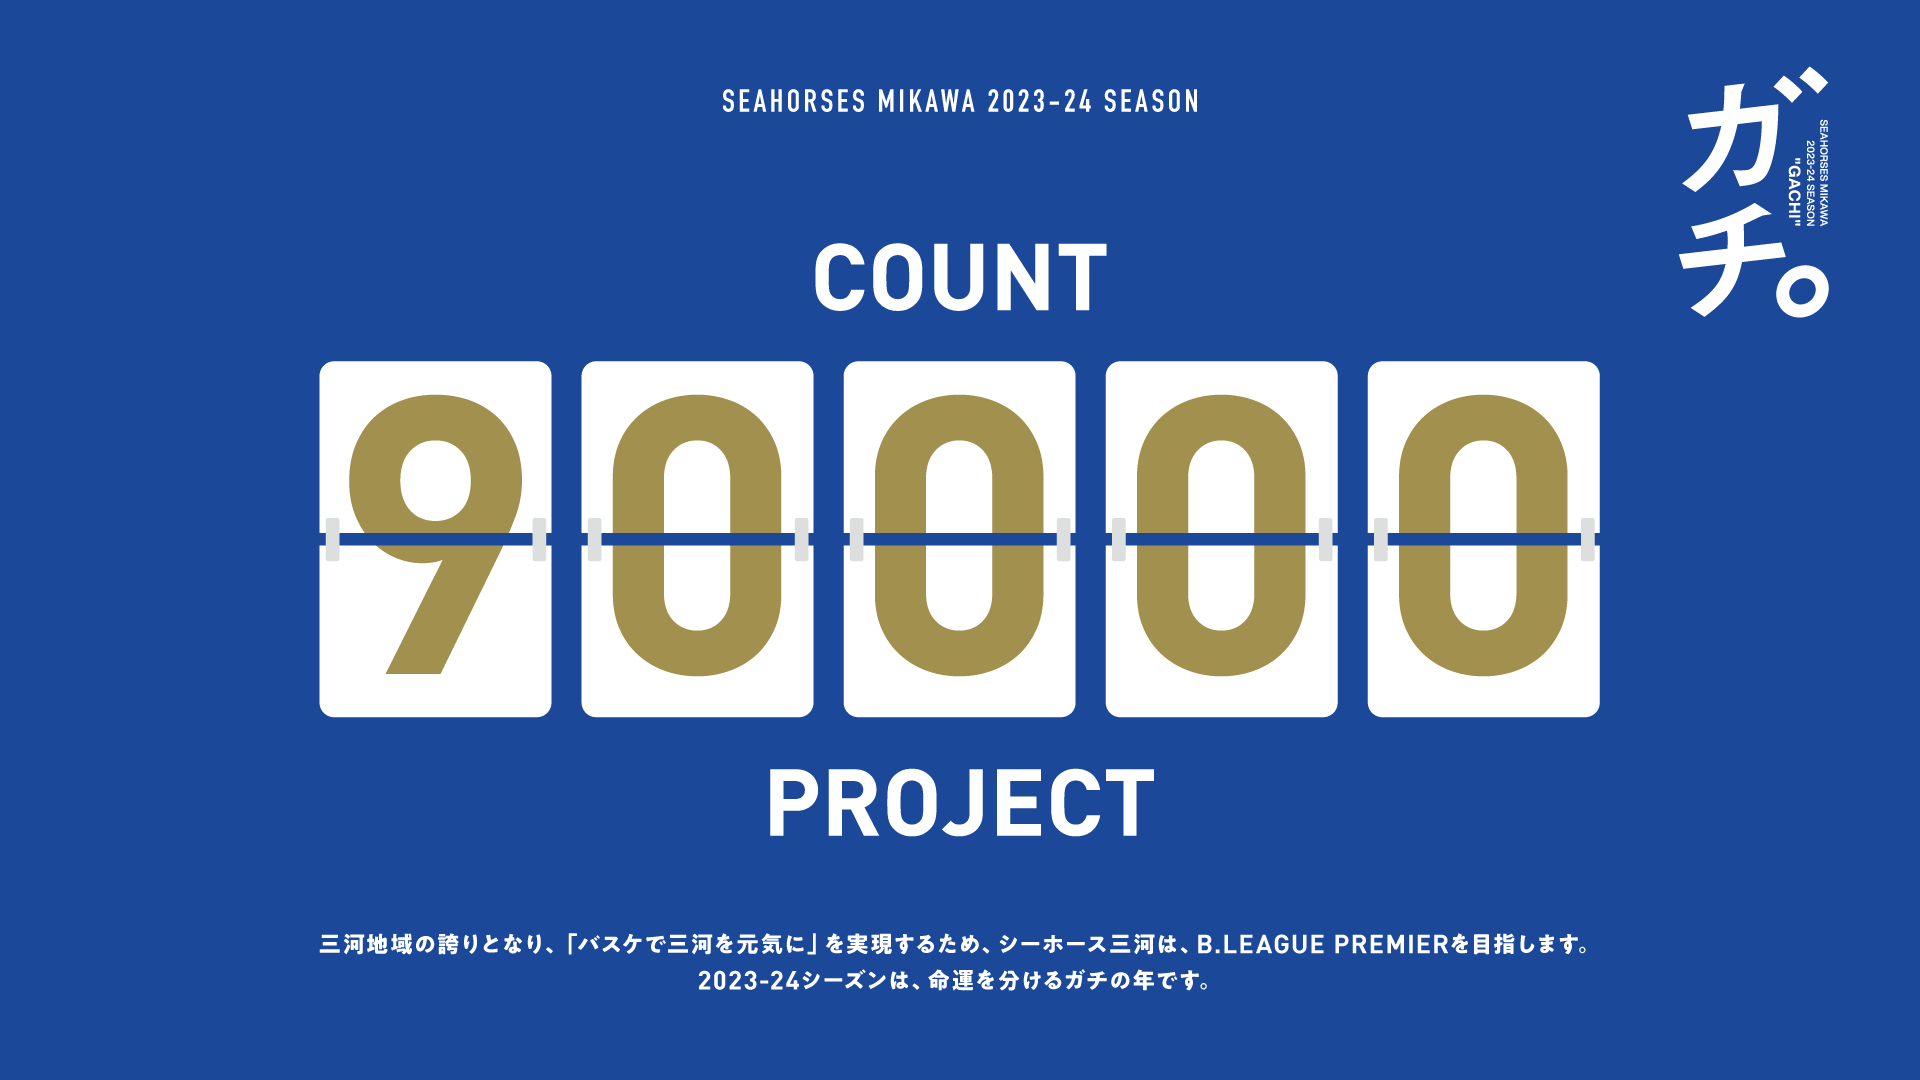 COUNT 90,000 PROJECT